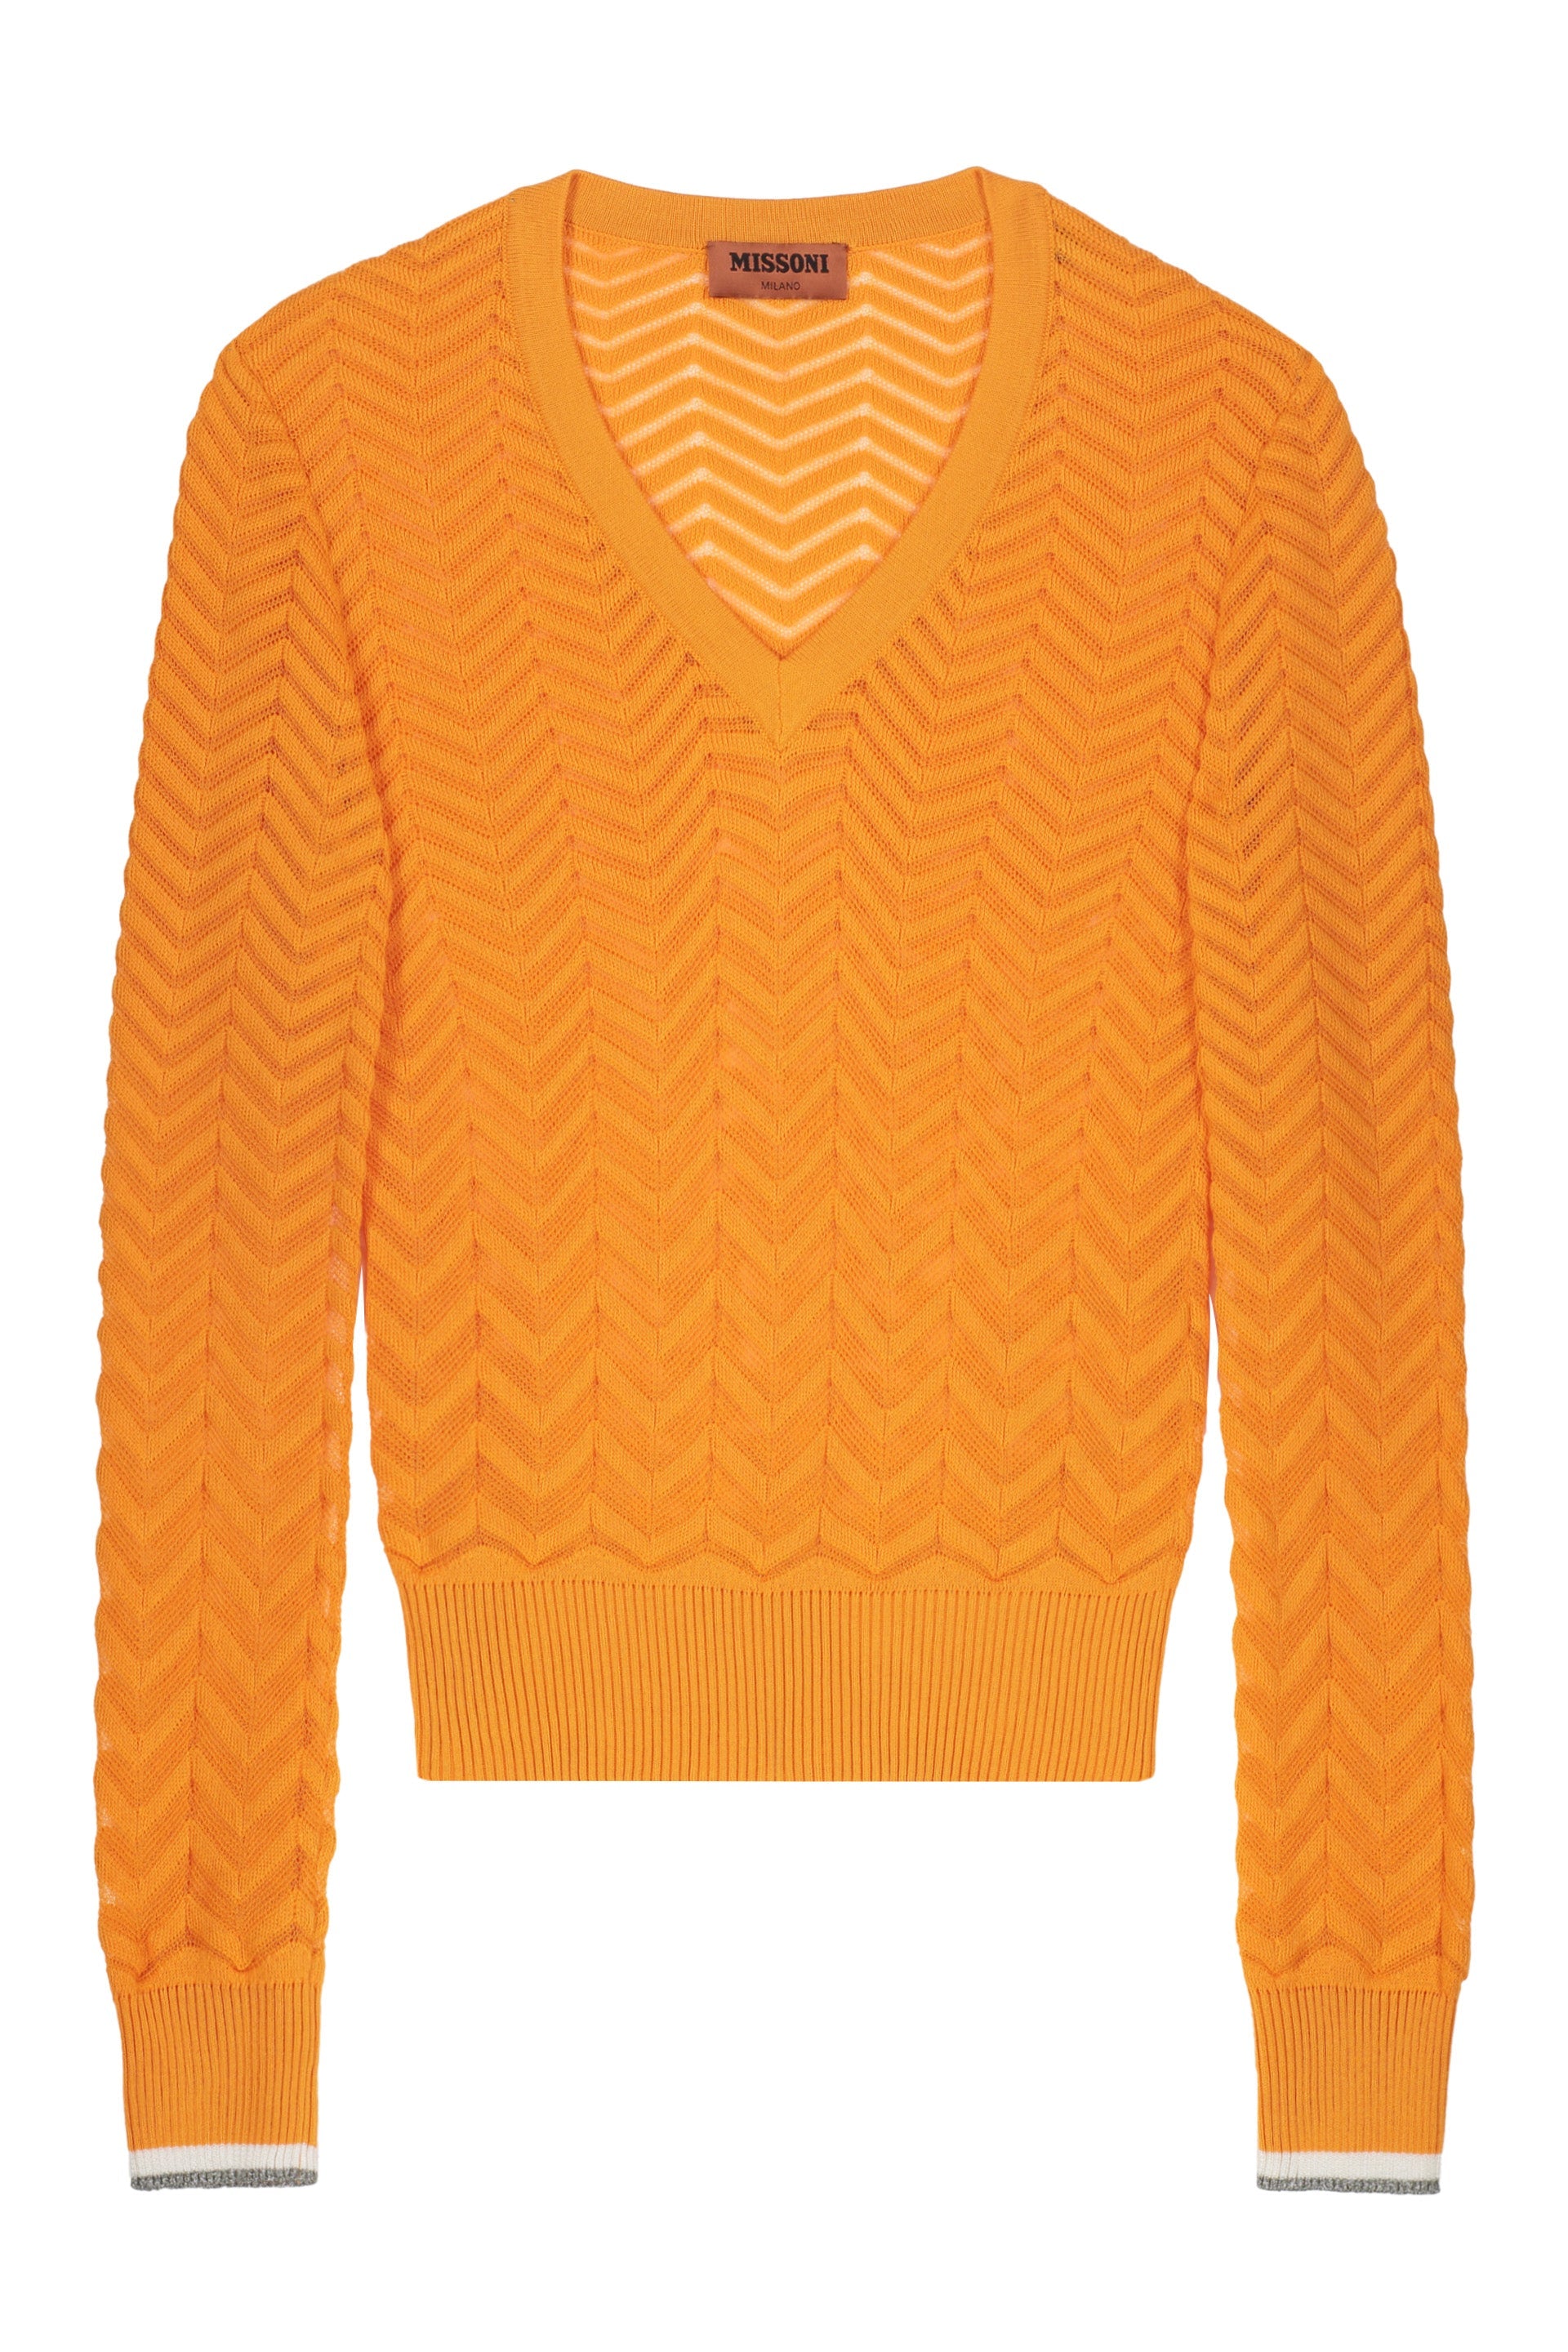 Missoni-OUTLET-SALE-Cotton-V-neck-sweater-Strick-40-ARCHIVE-COLLECTION.jpg